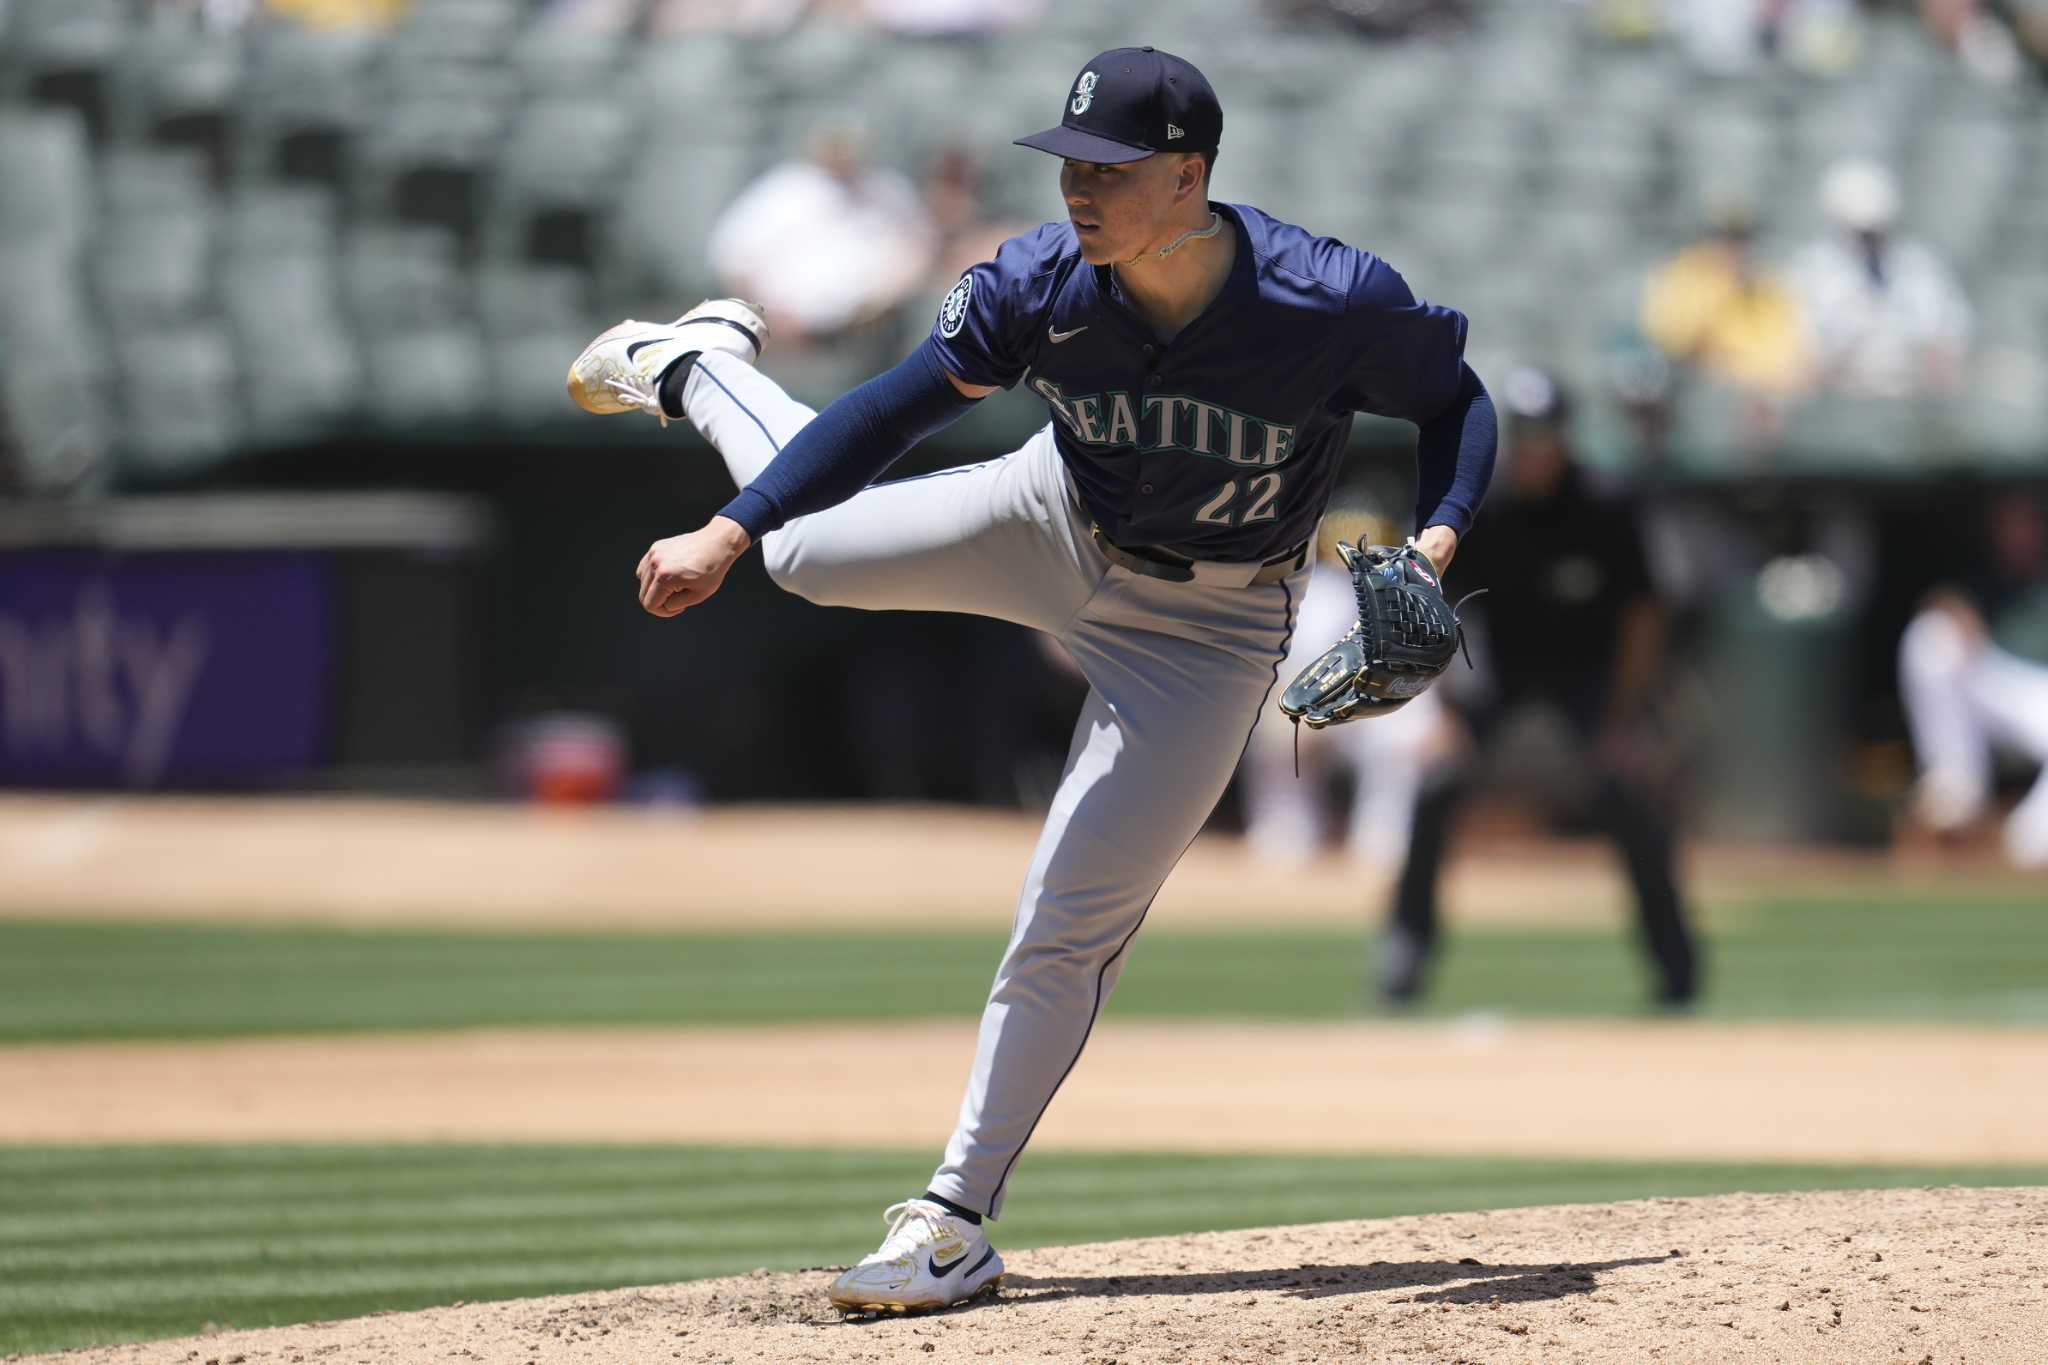 Bryan Woo and 3 relievers combine for 2-hit shutout as Mariners stop A's 2-0